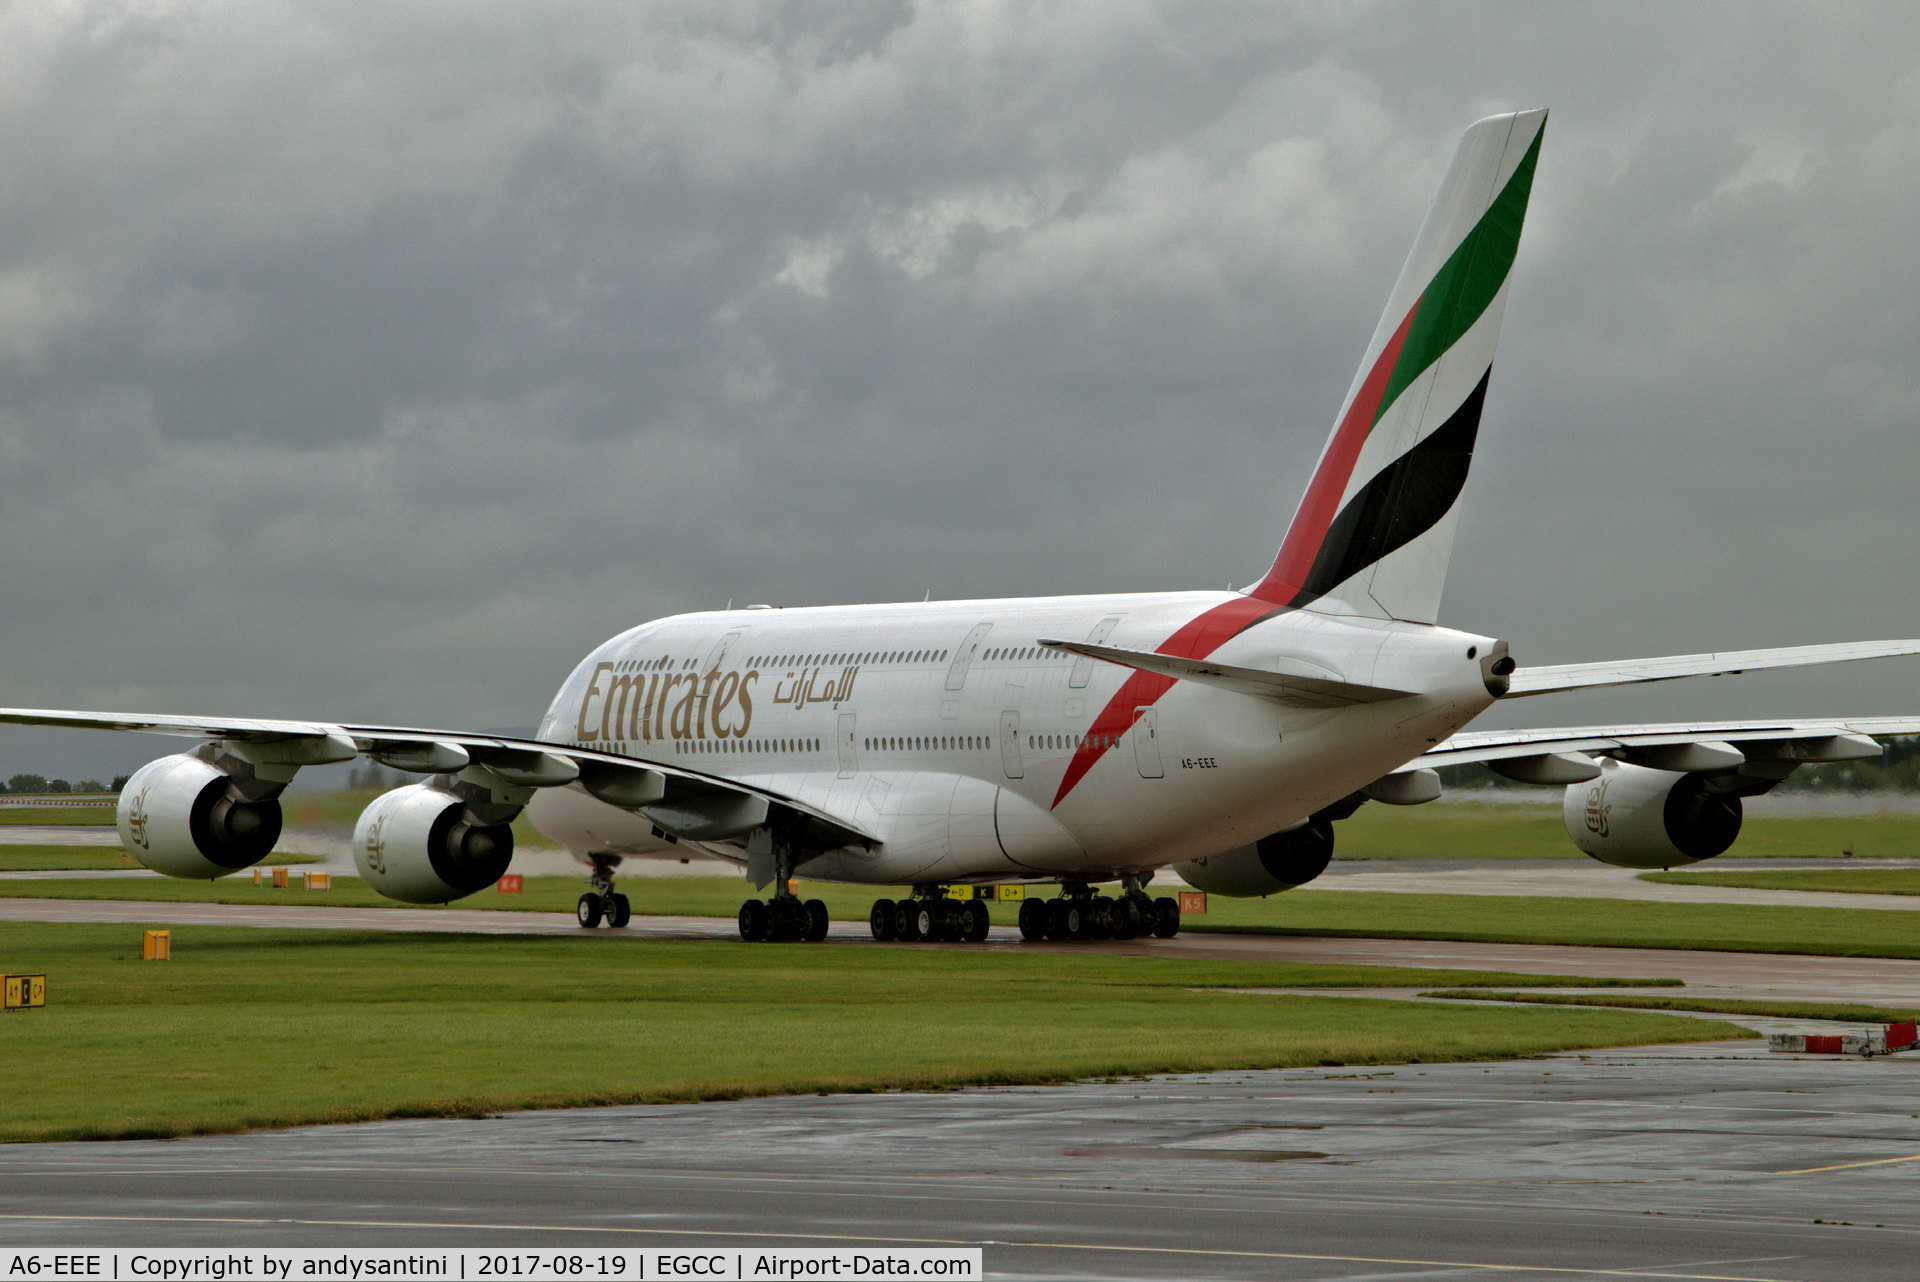 A6-EEE, 2012 Airbus A380-861 C/N 112, taxing in to its gate/stand